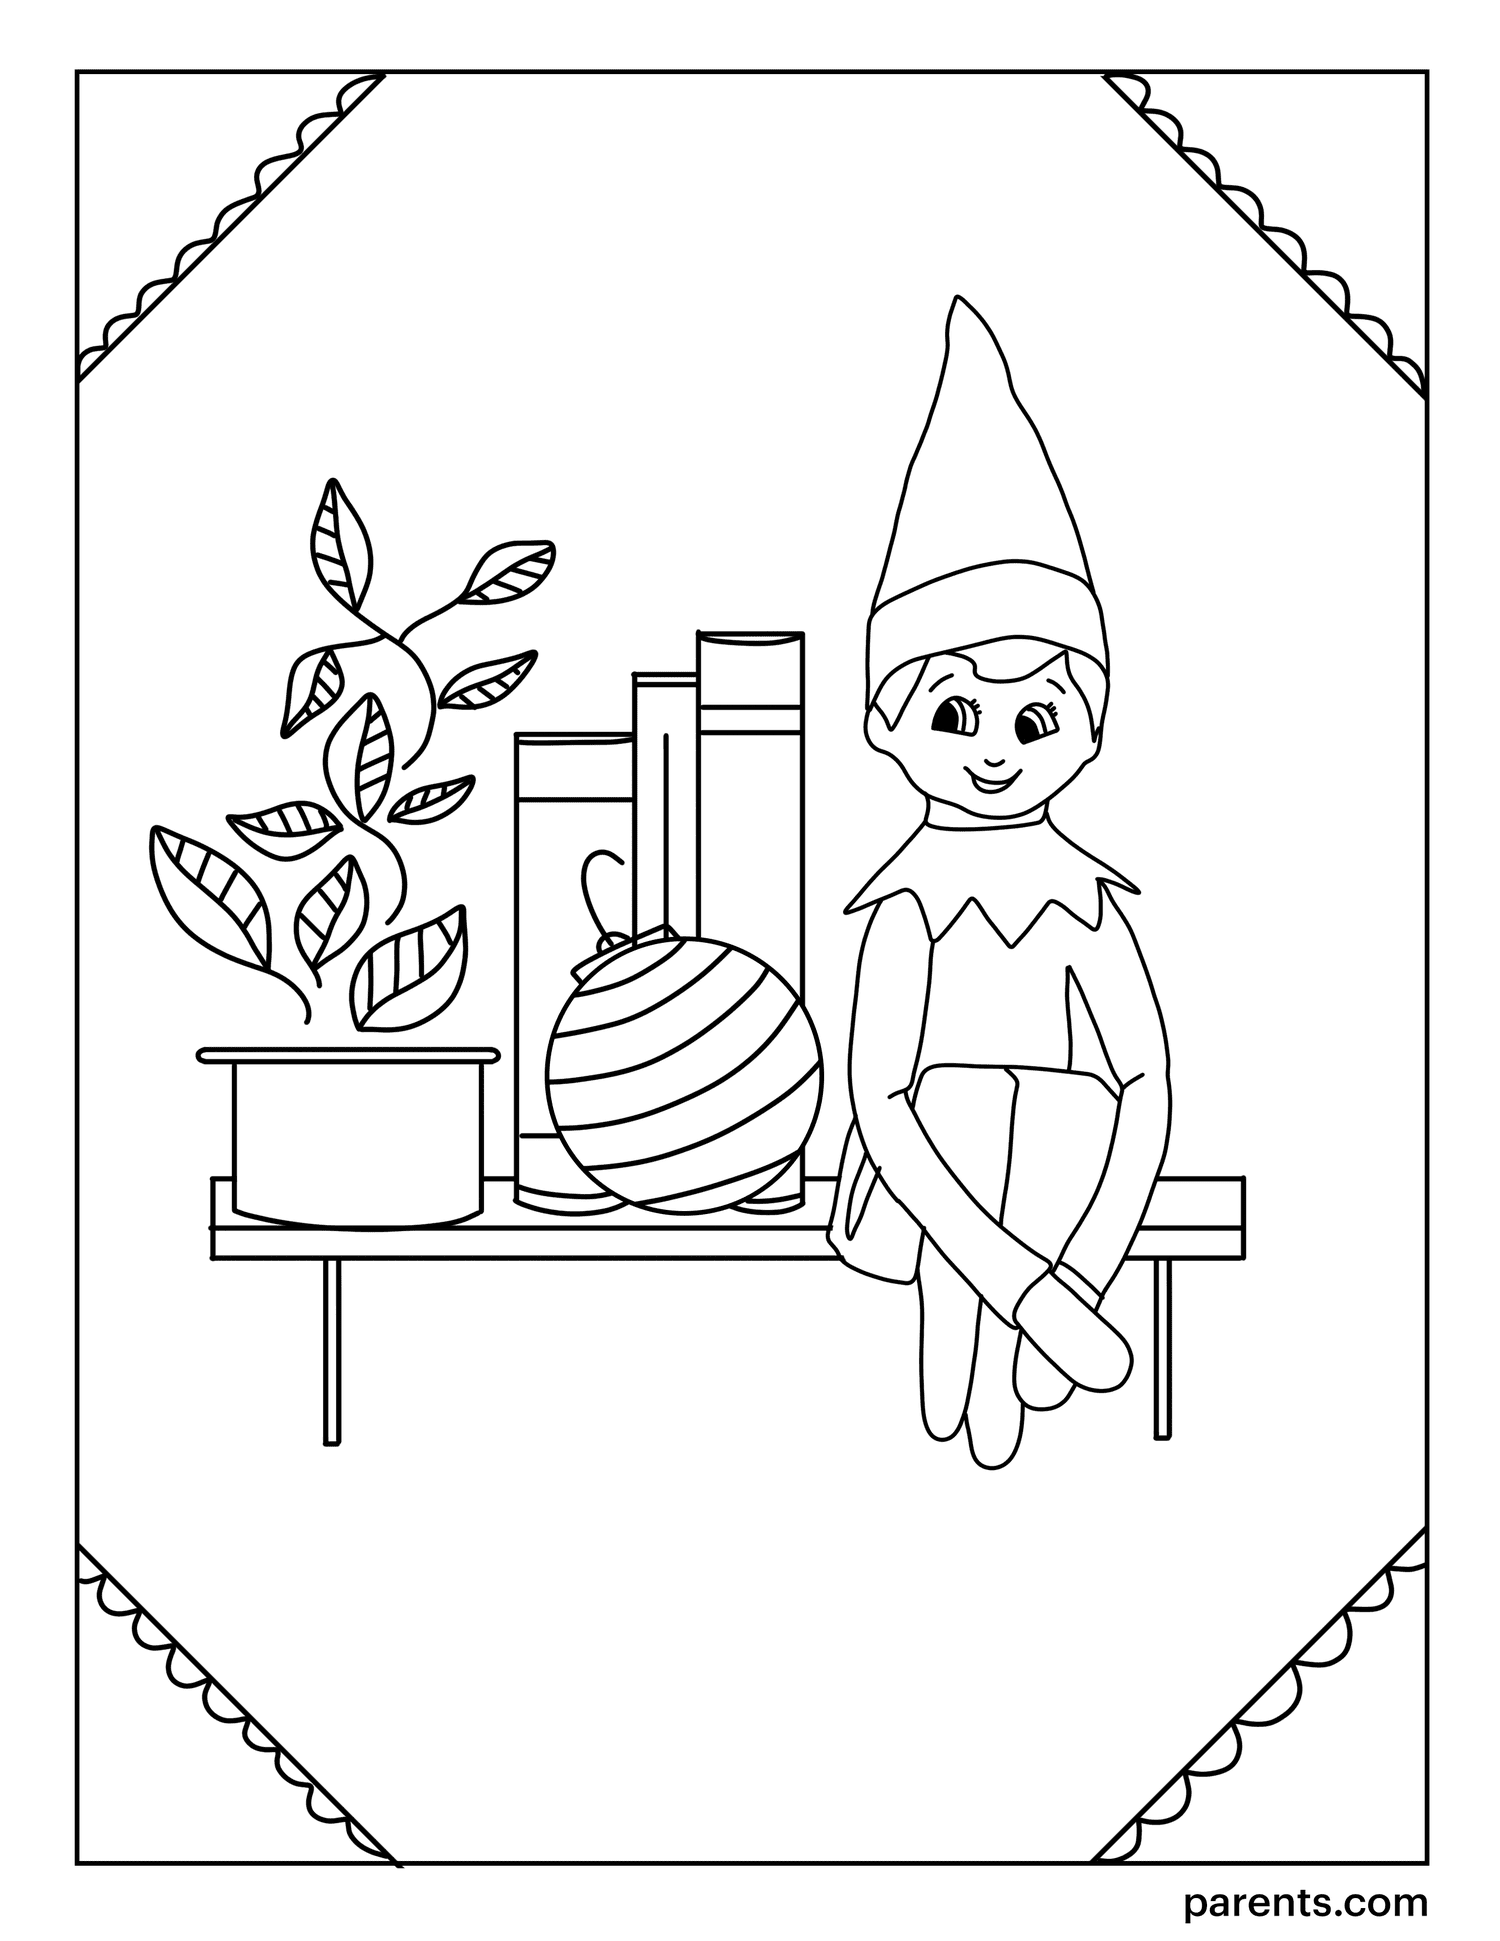 hermie-the-elf-pages-coloring-pages